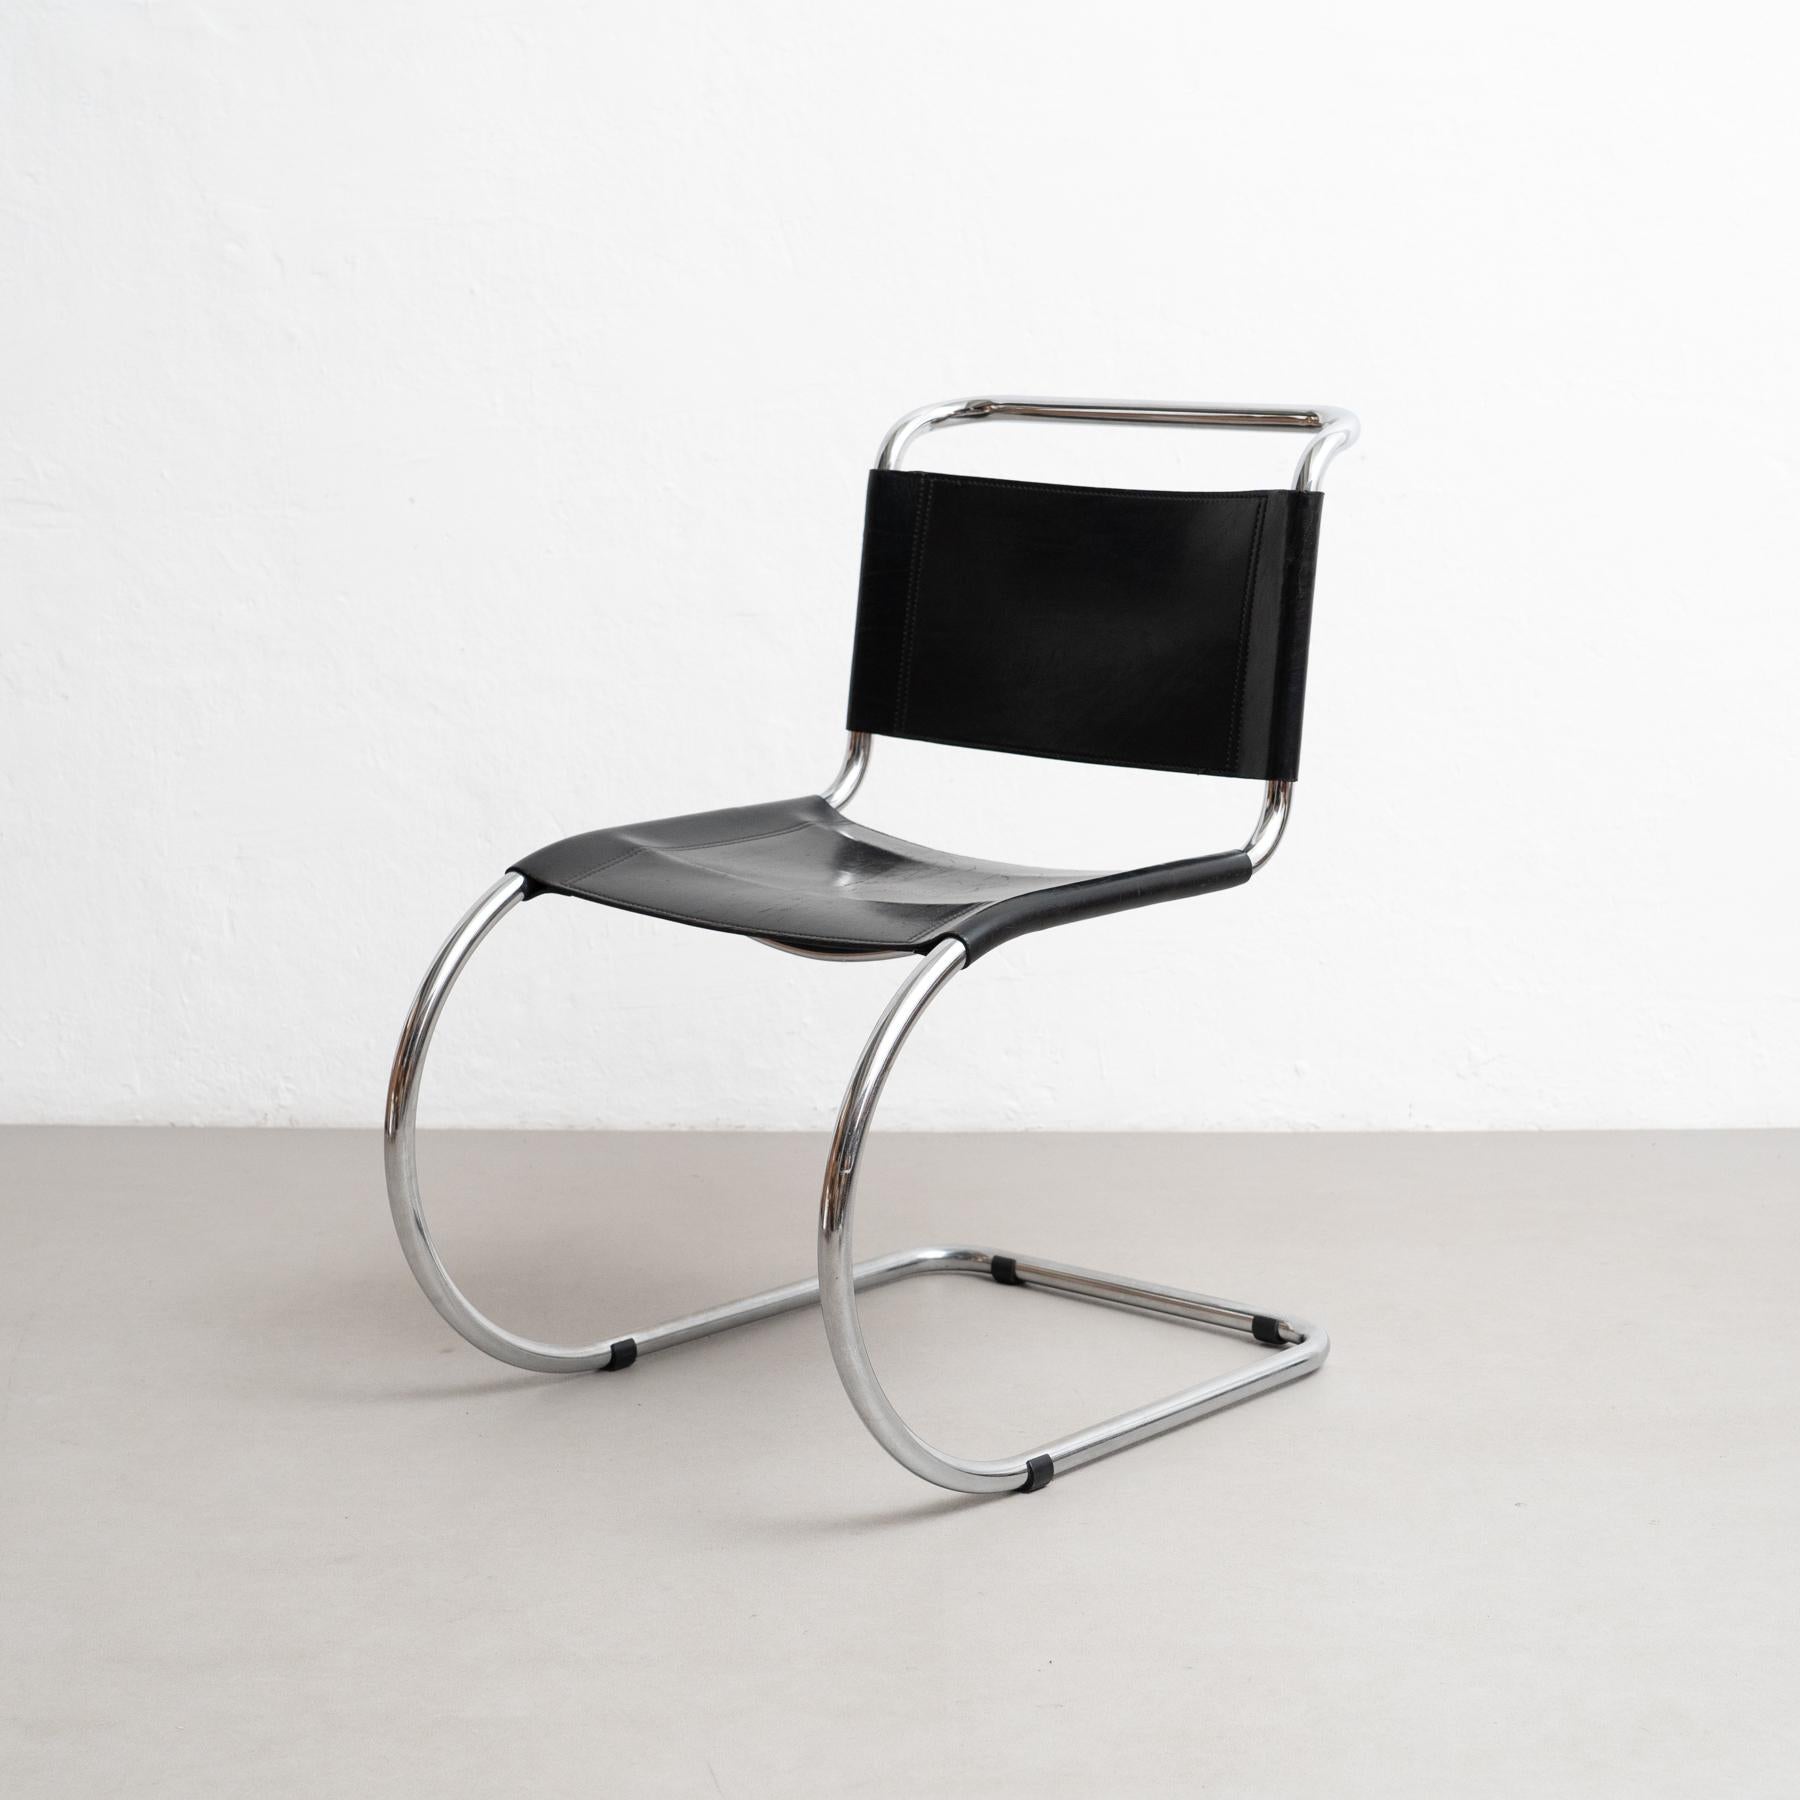 German Mies van der Rohe MR10 Black Leather Easy Chair, circa 1960 For Sale